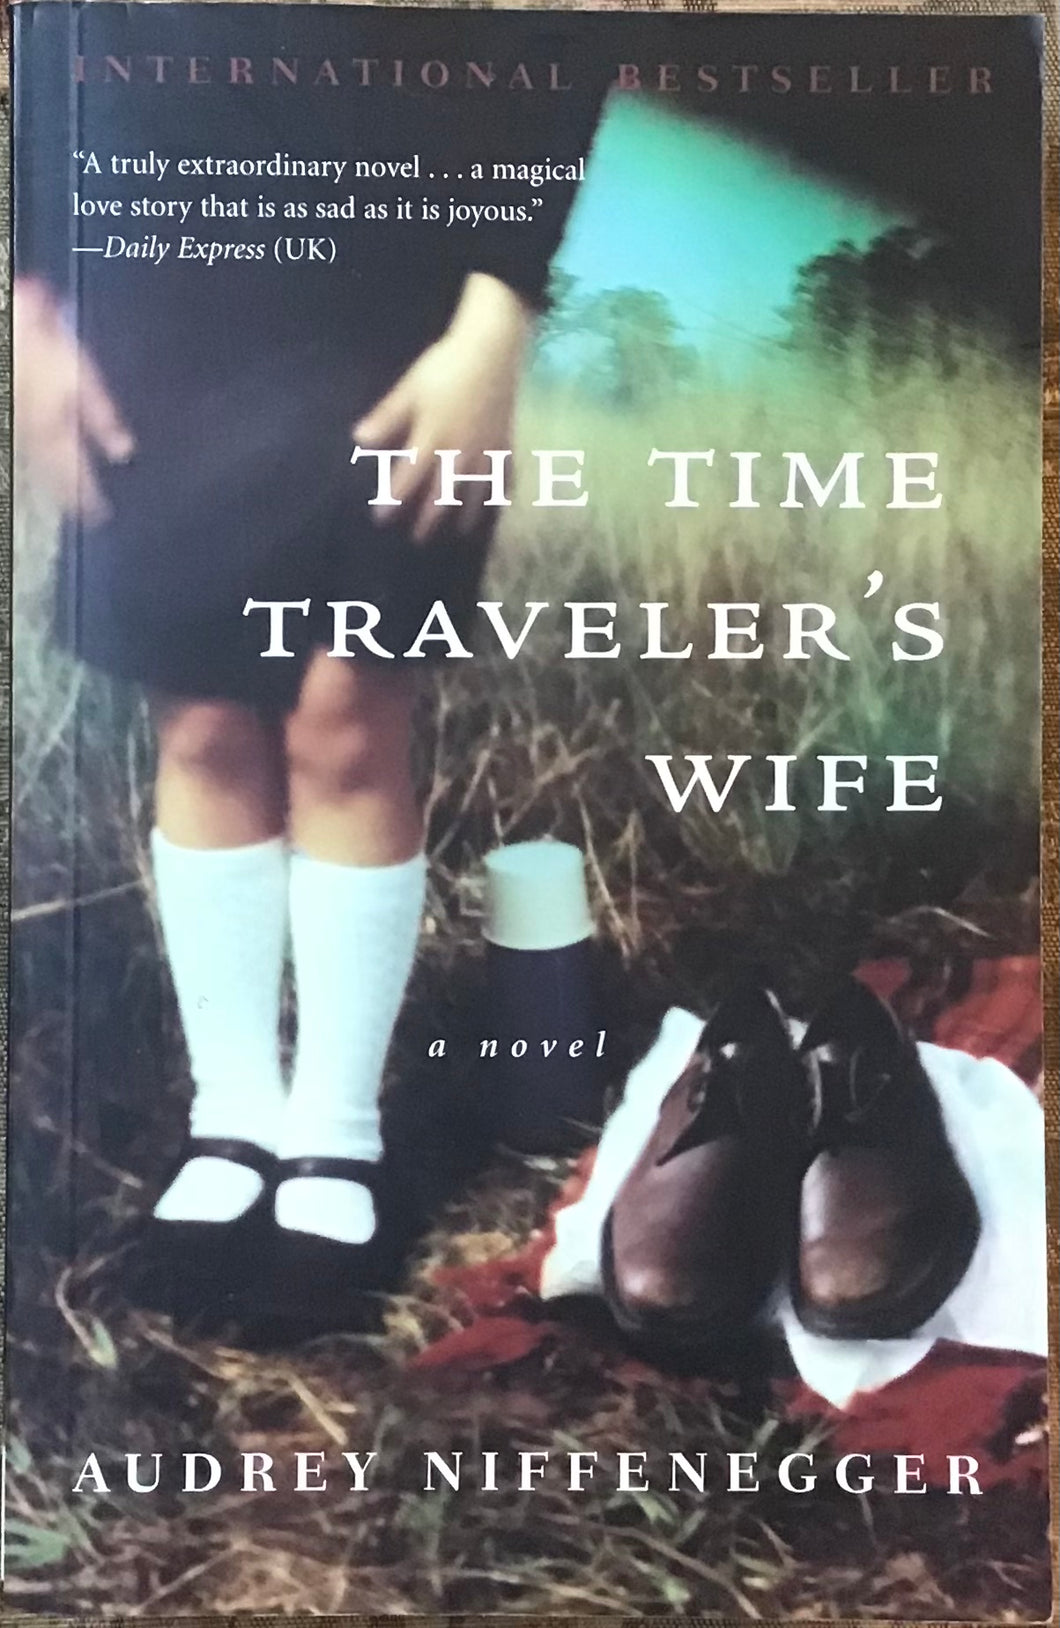 The Time Traveler’s Wife, Audrey Niffenegger